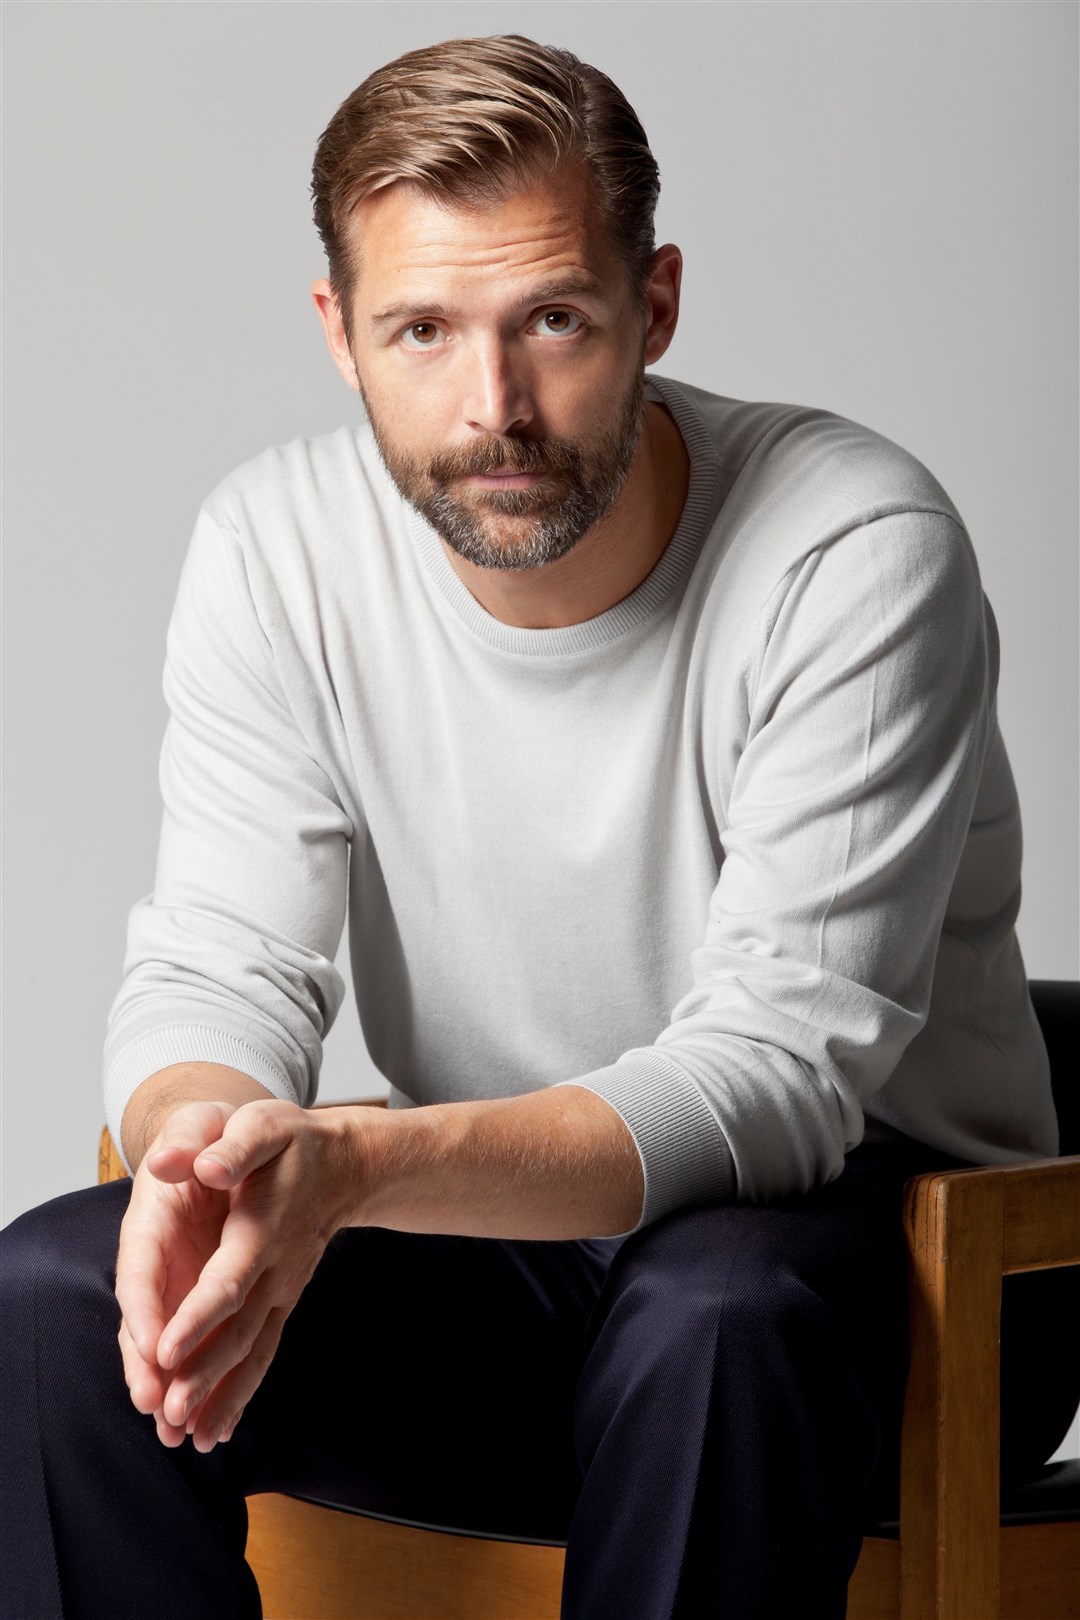 Great British Sewing Bee star Patrick Grant is among the XpoNorth online speakers.